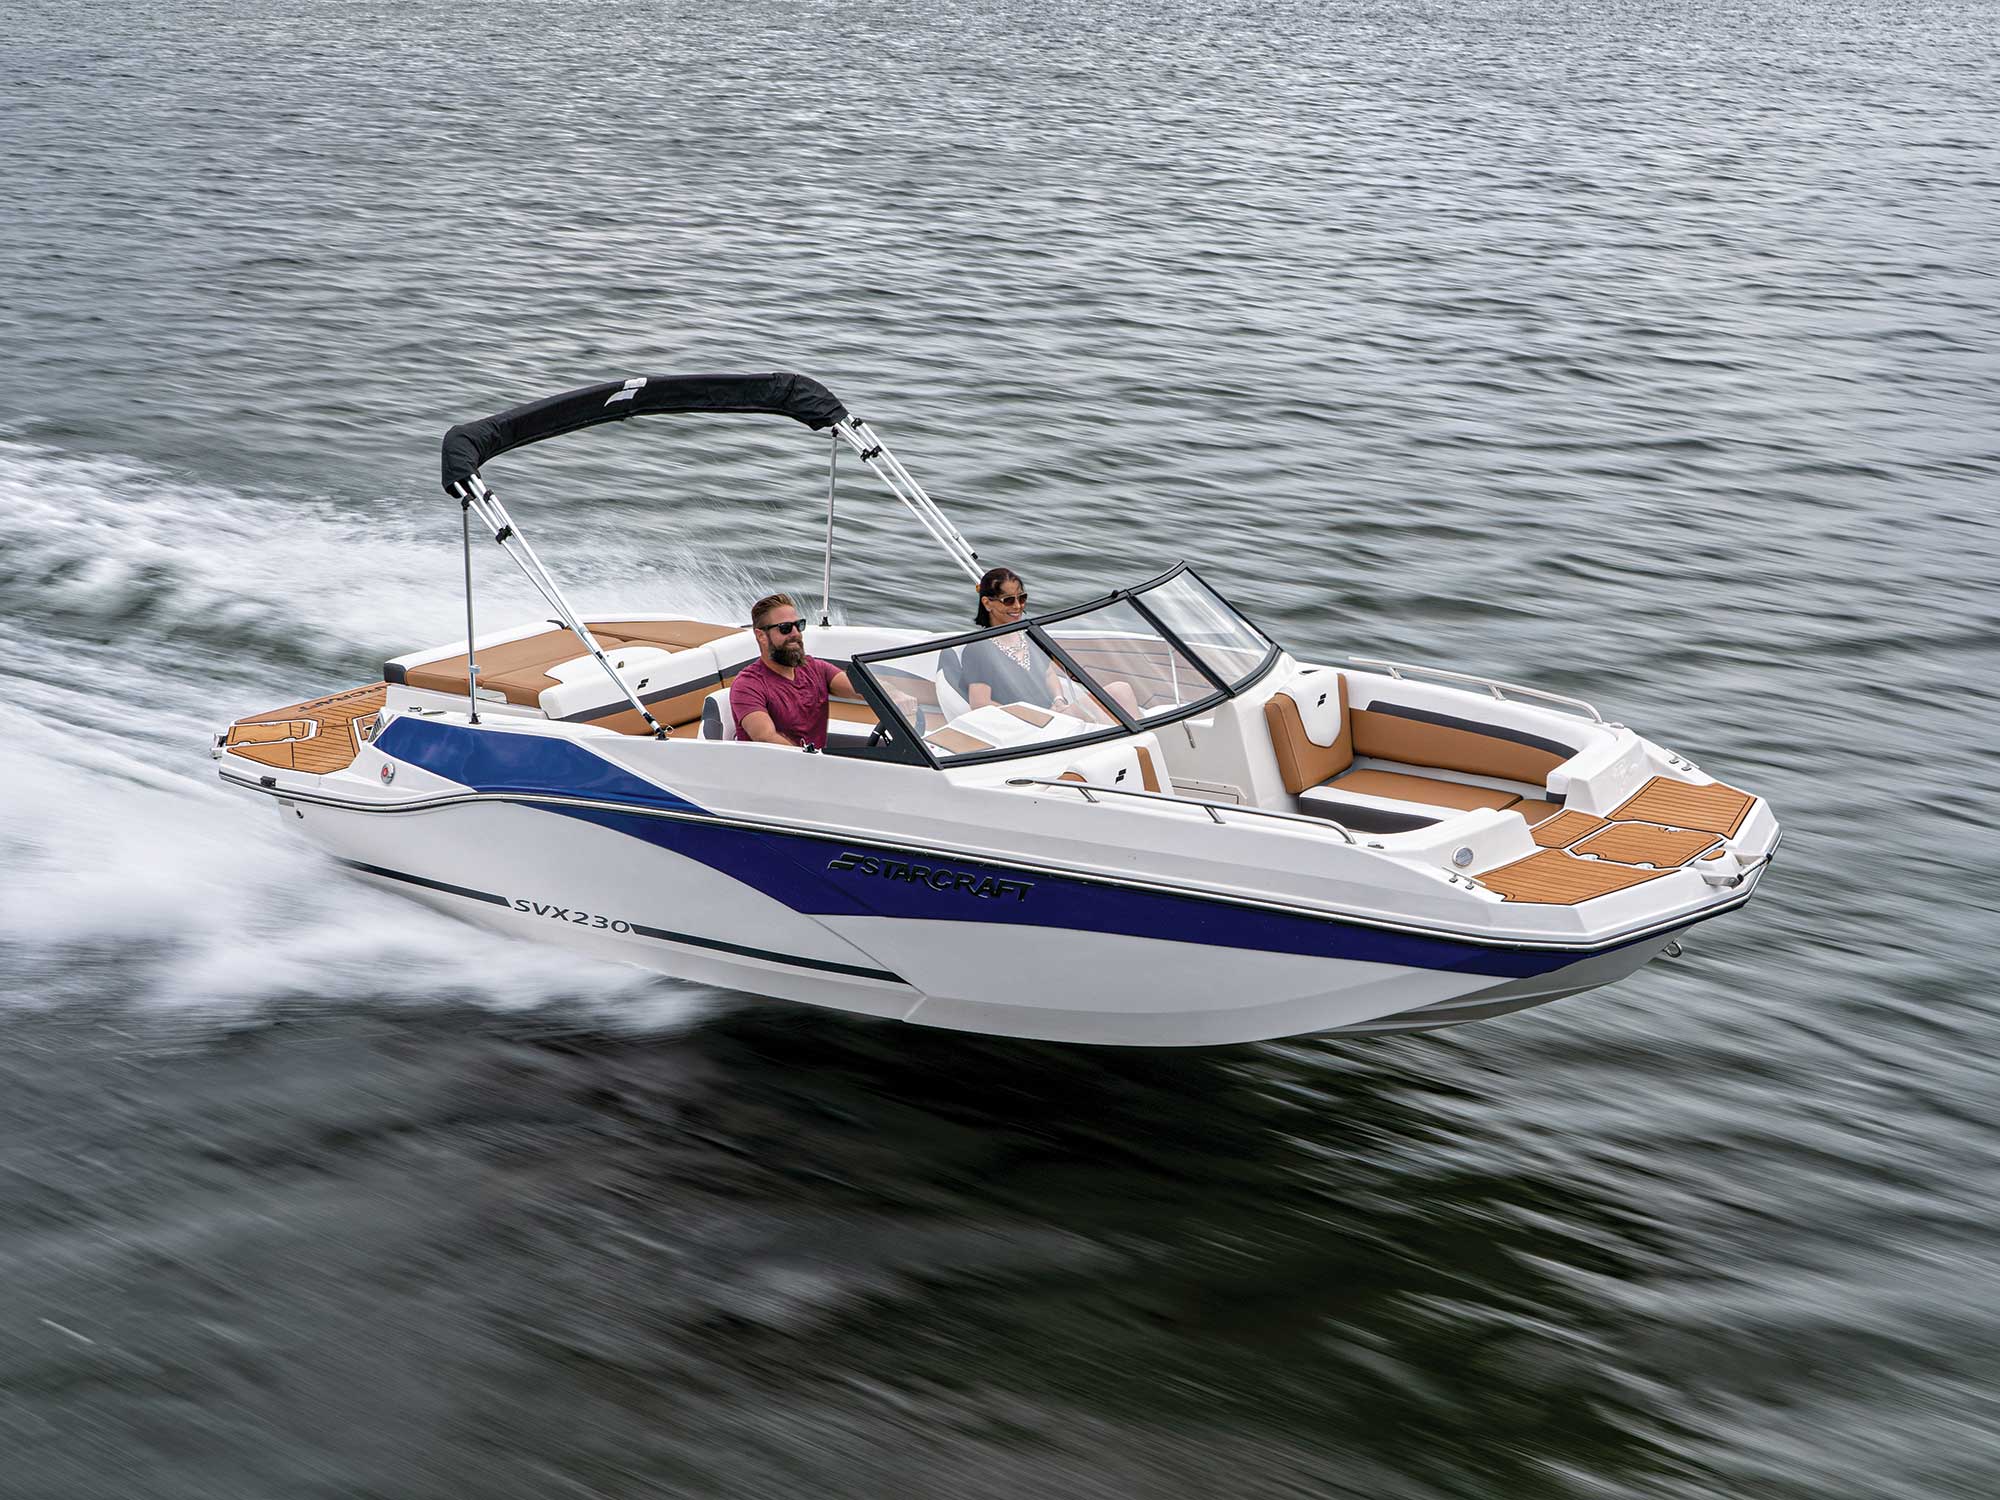 2023 Starcraft SVX 230 IO Boat Test, Pricing, Specs | Boating Mag